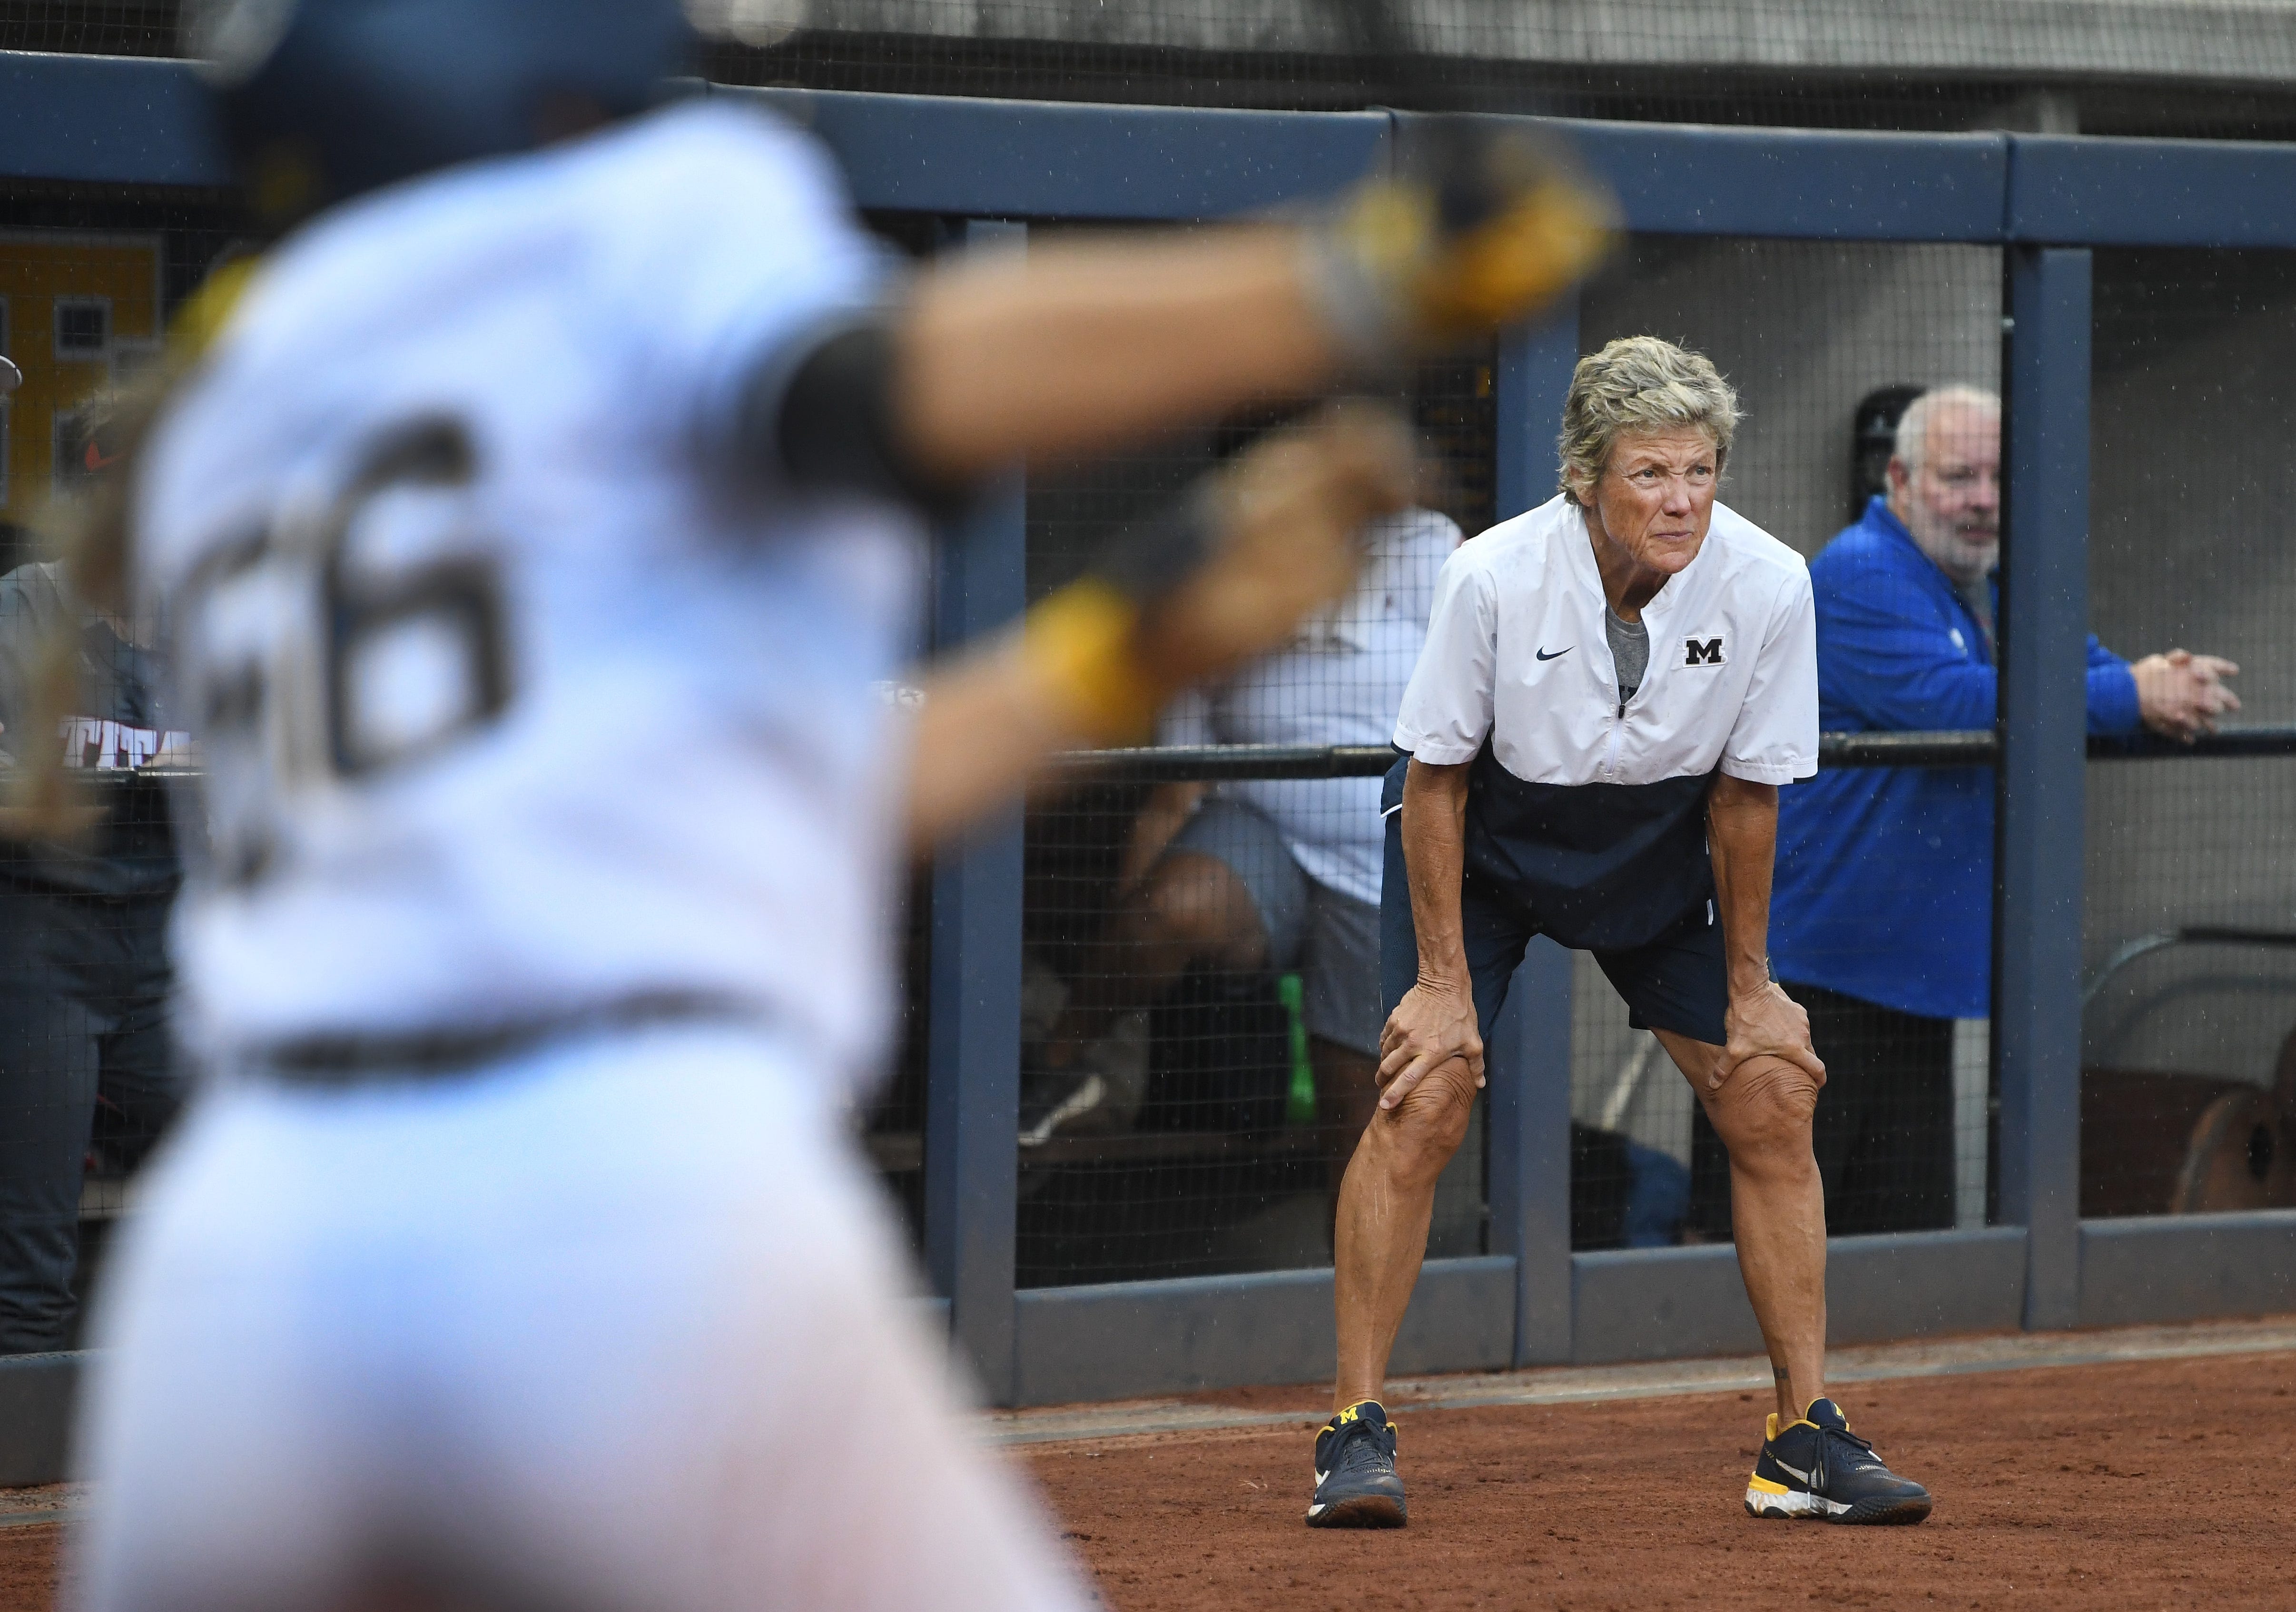 UM softball coach Carol Hutchins during a softball game against the University of Detroit Mercy at Alumni Field on UM's campus on Oct. 14, 2021.